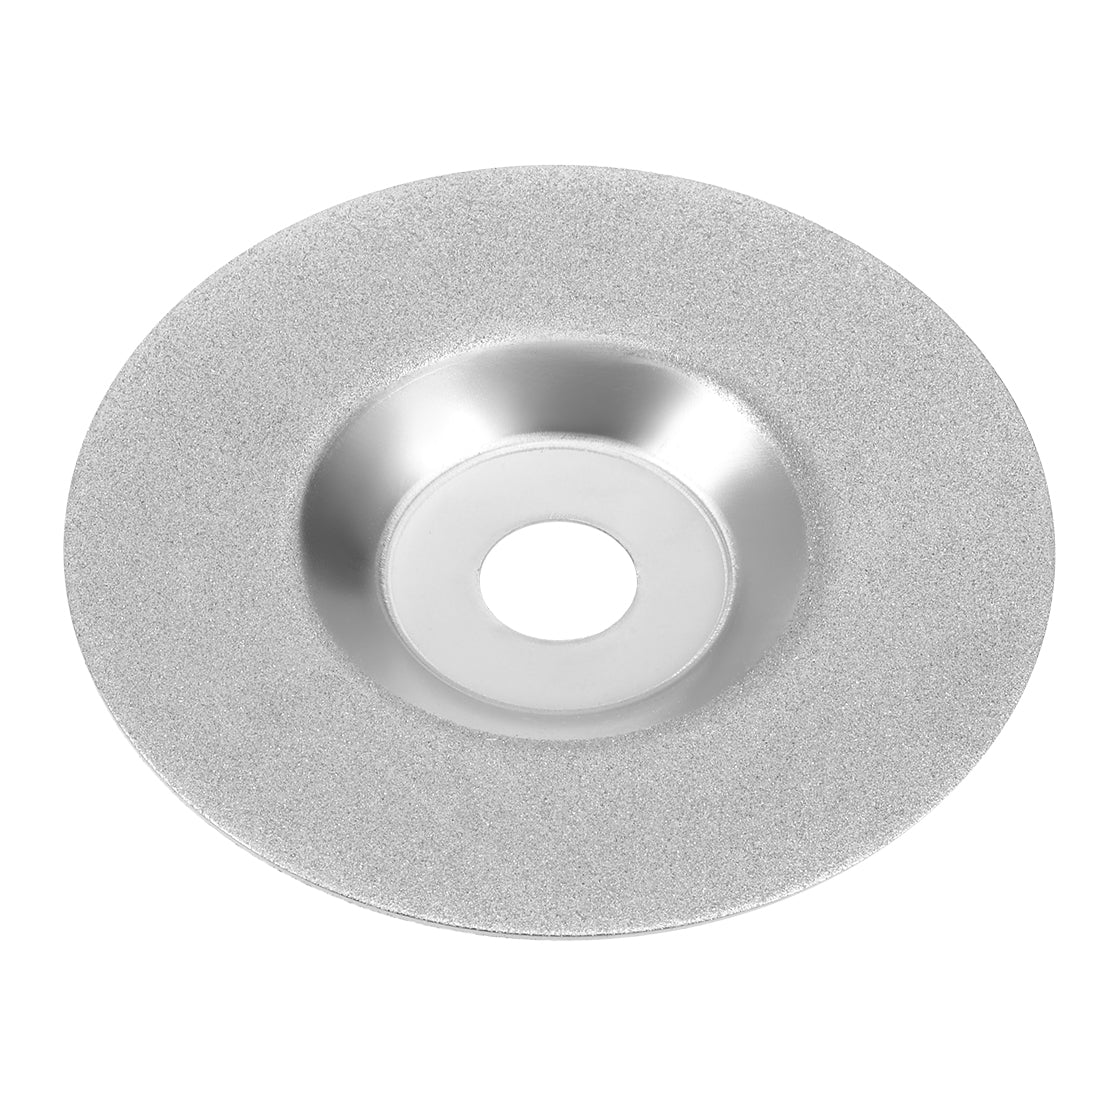 Uxcell Uxcell Diamond Grinding Disc, 4 Inch Glass Stone Grinding Wheel 120-150 Grit